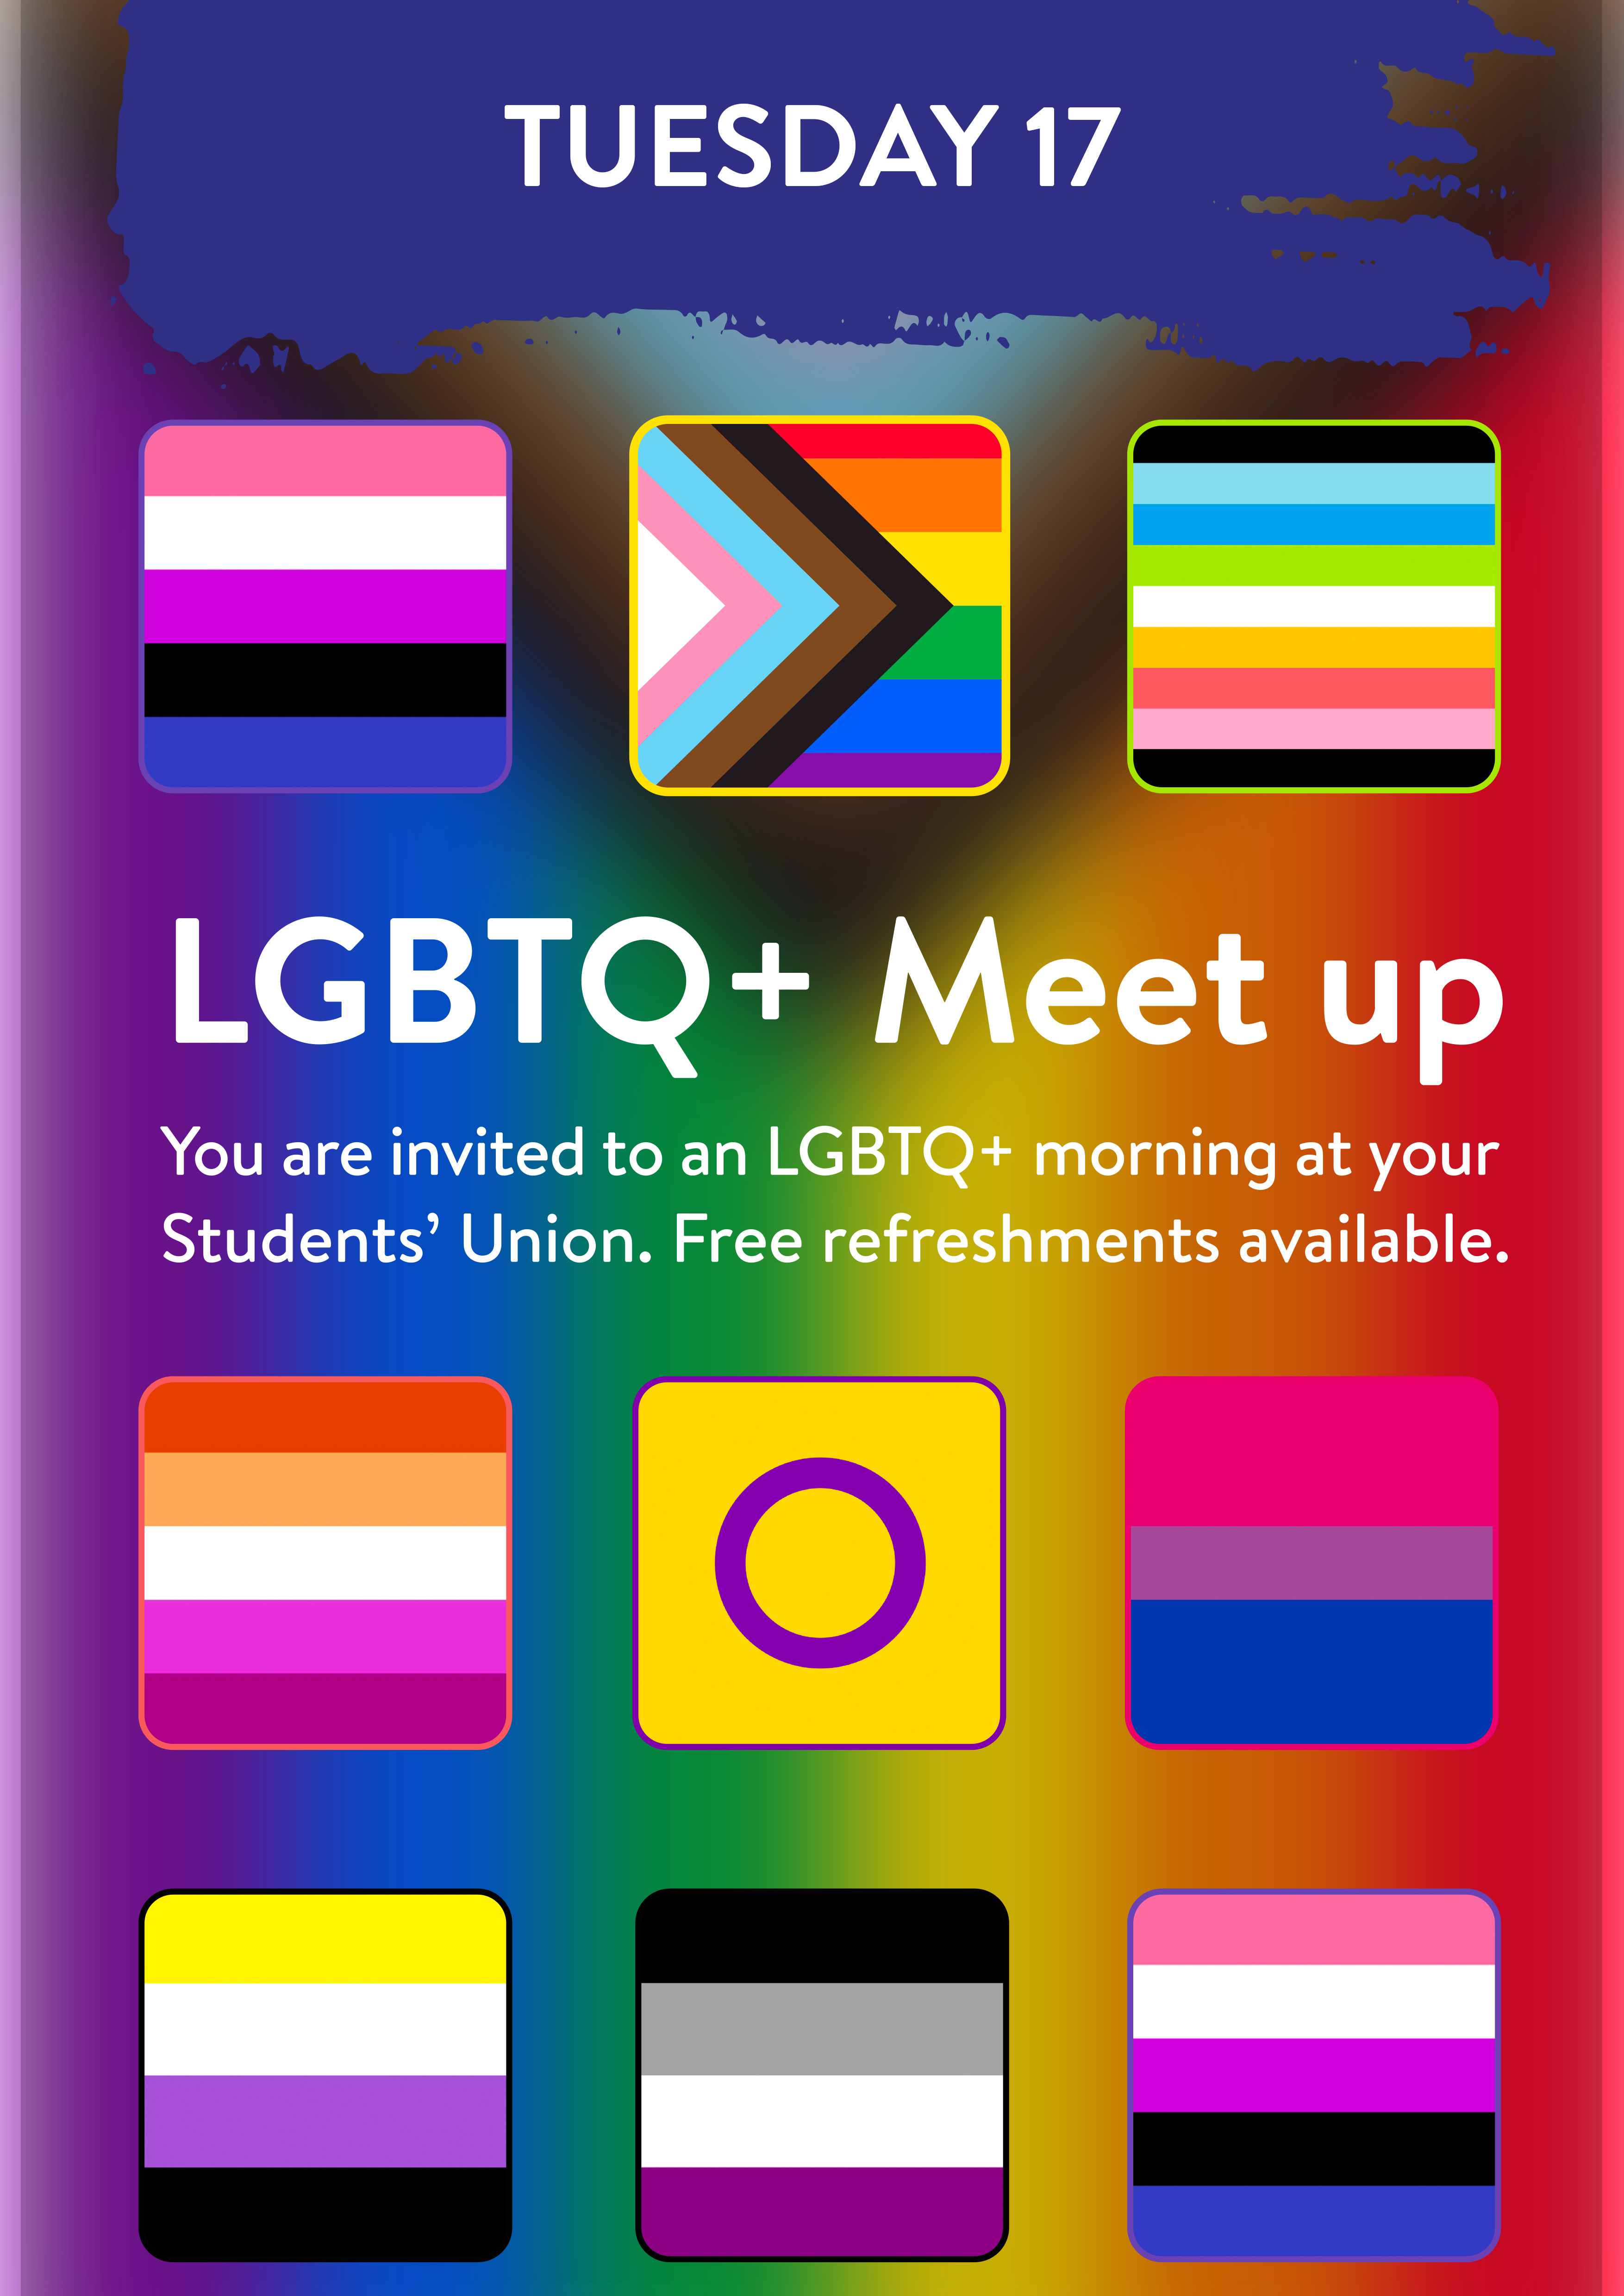 Tuesday 17 January. LGTBQ+ Meet Up. You are invited to an LGBTQ+ morning at your Students' Union. Free refreshments available.